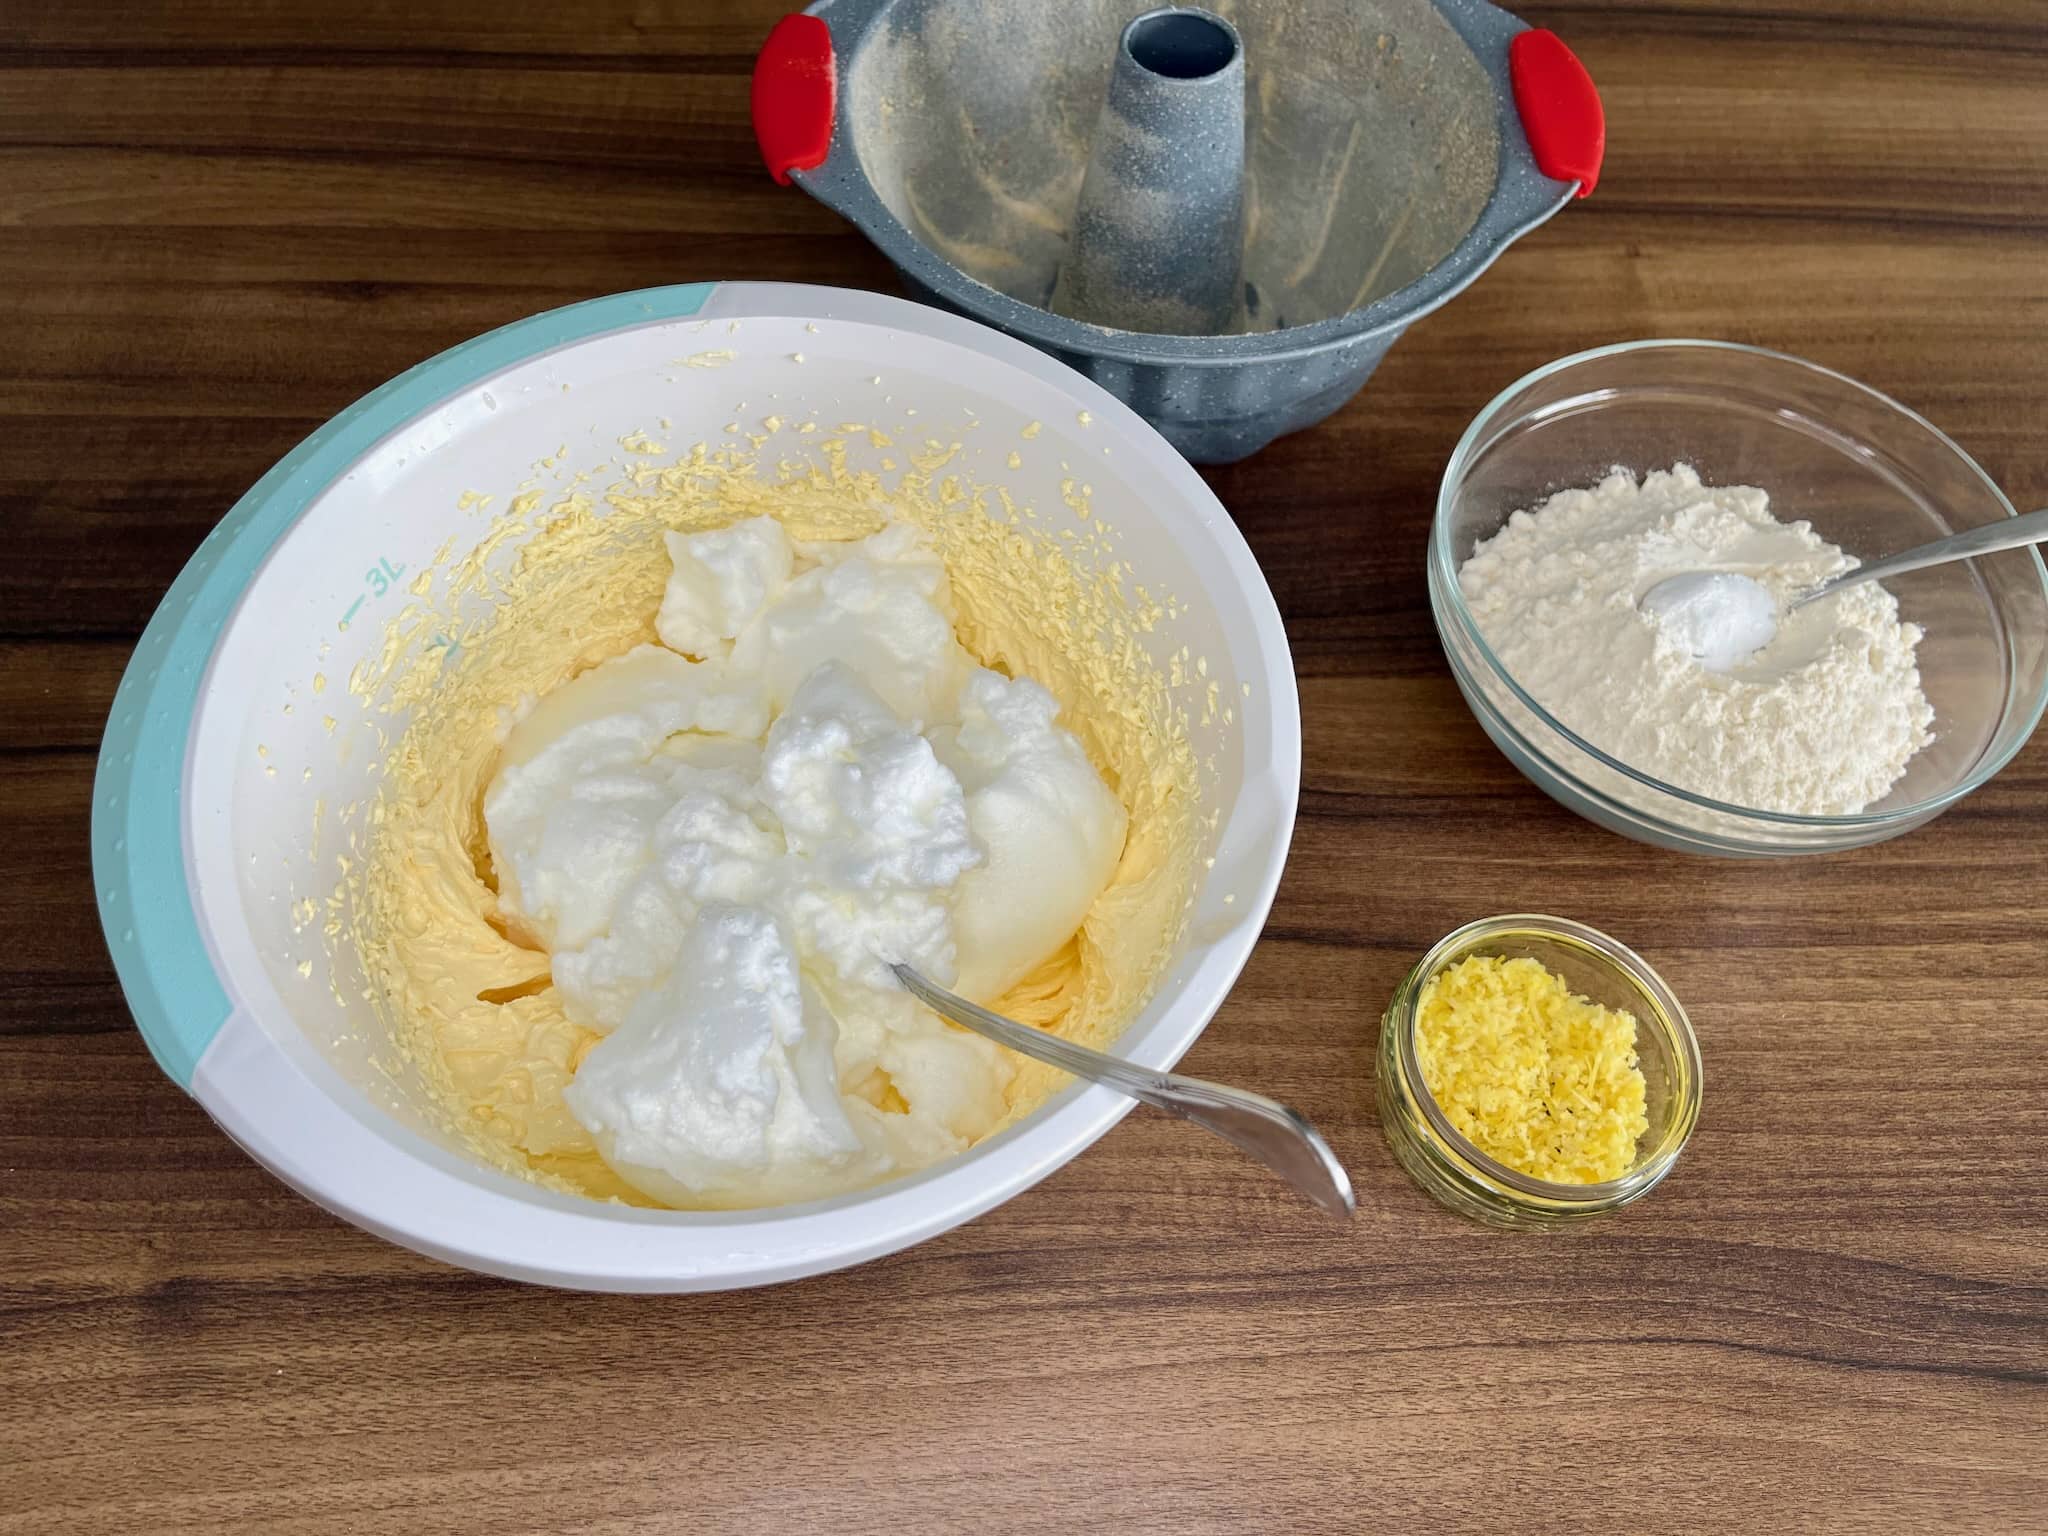 Yolks mixed with sugar and butter with added mixed egg whites in a bowl